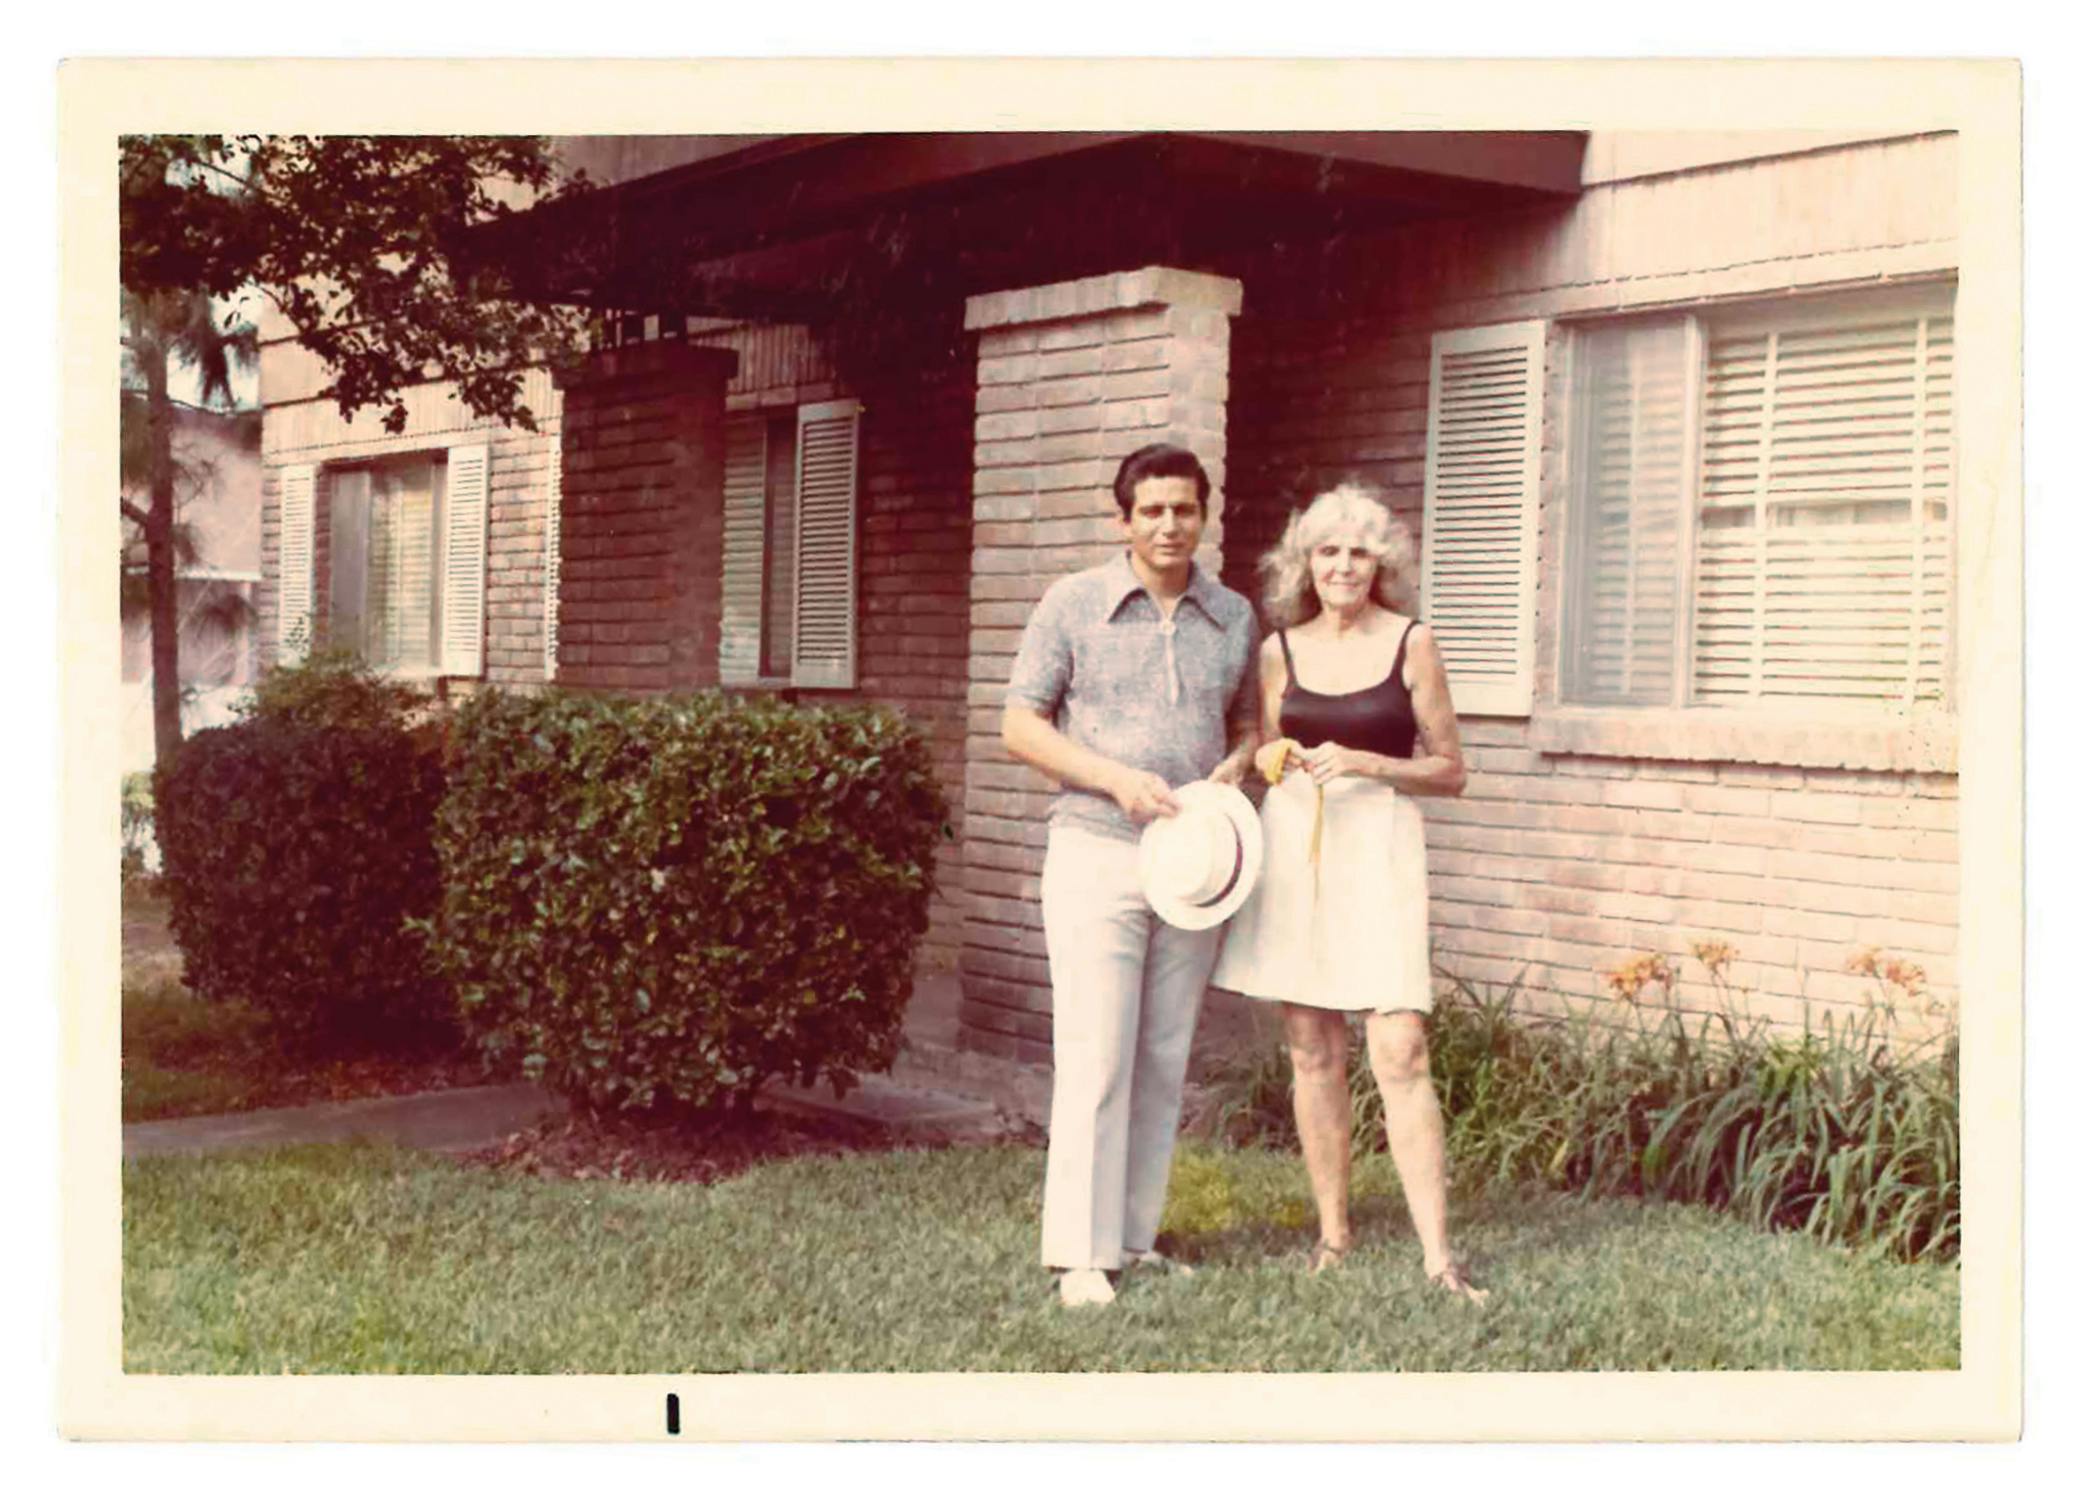 Prison system love story success: Cruz and Jalet in front of their home in 1972.